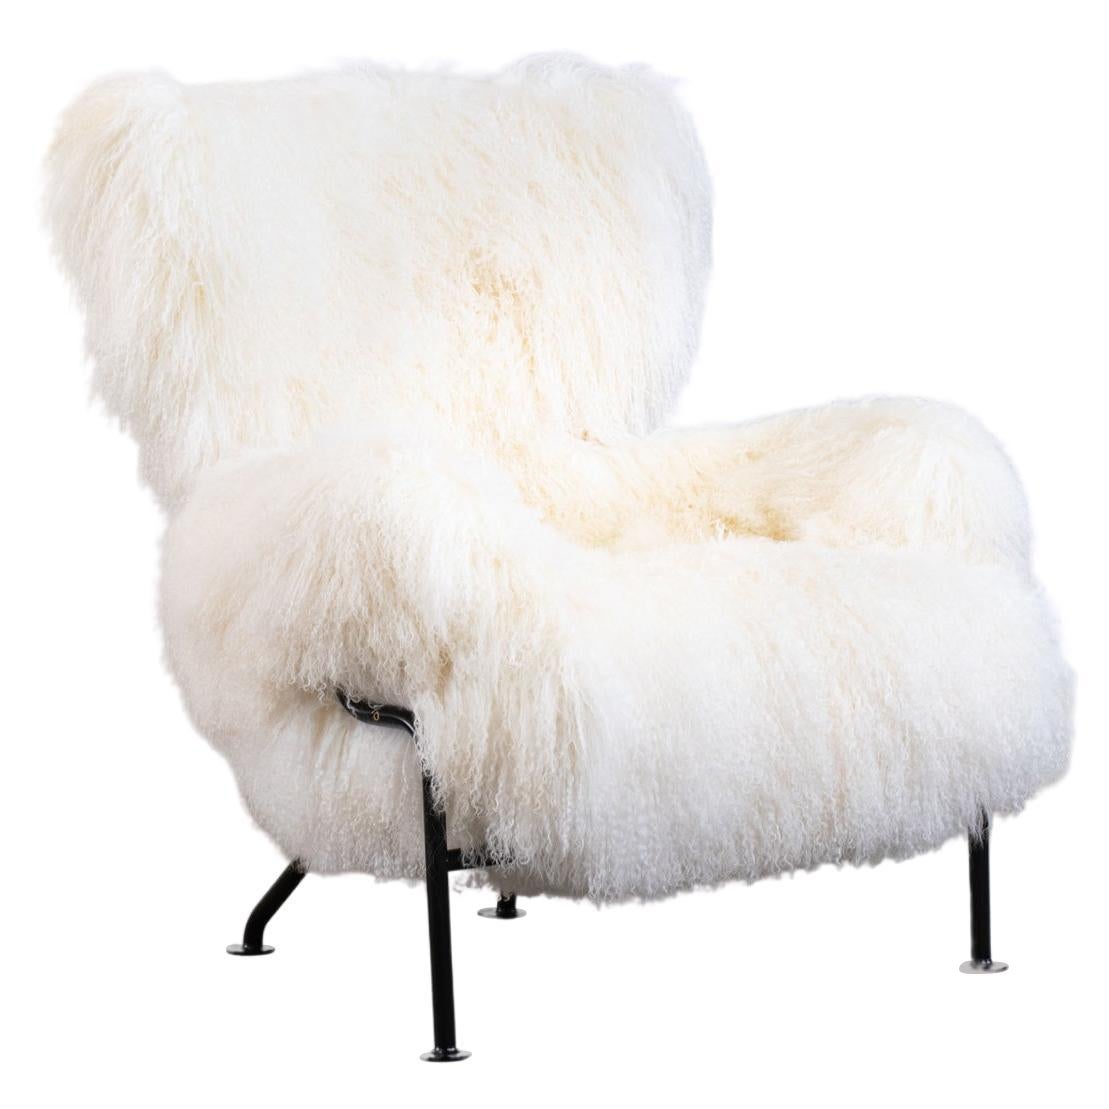 Franco Albini PL19 or Tre Pezzi Armchair in White Wool by Poggi Pavia, 1950s For Sale